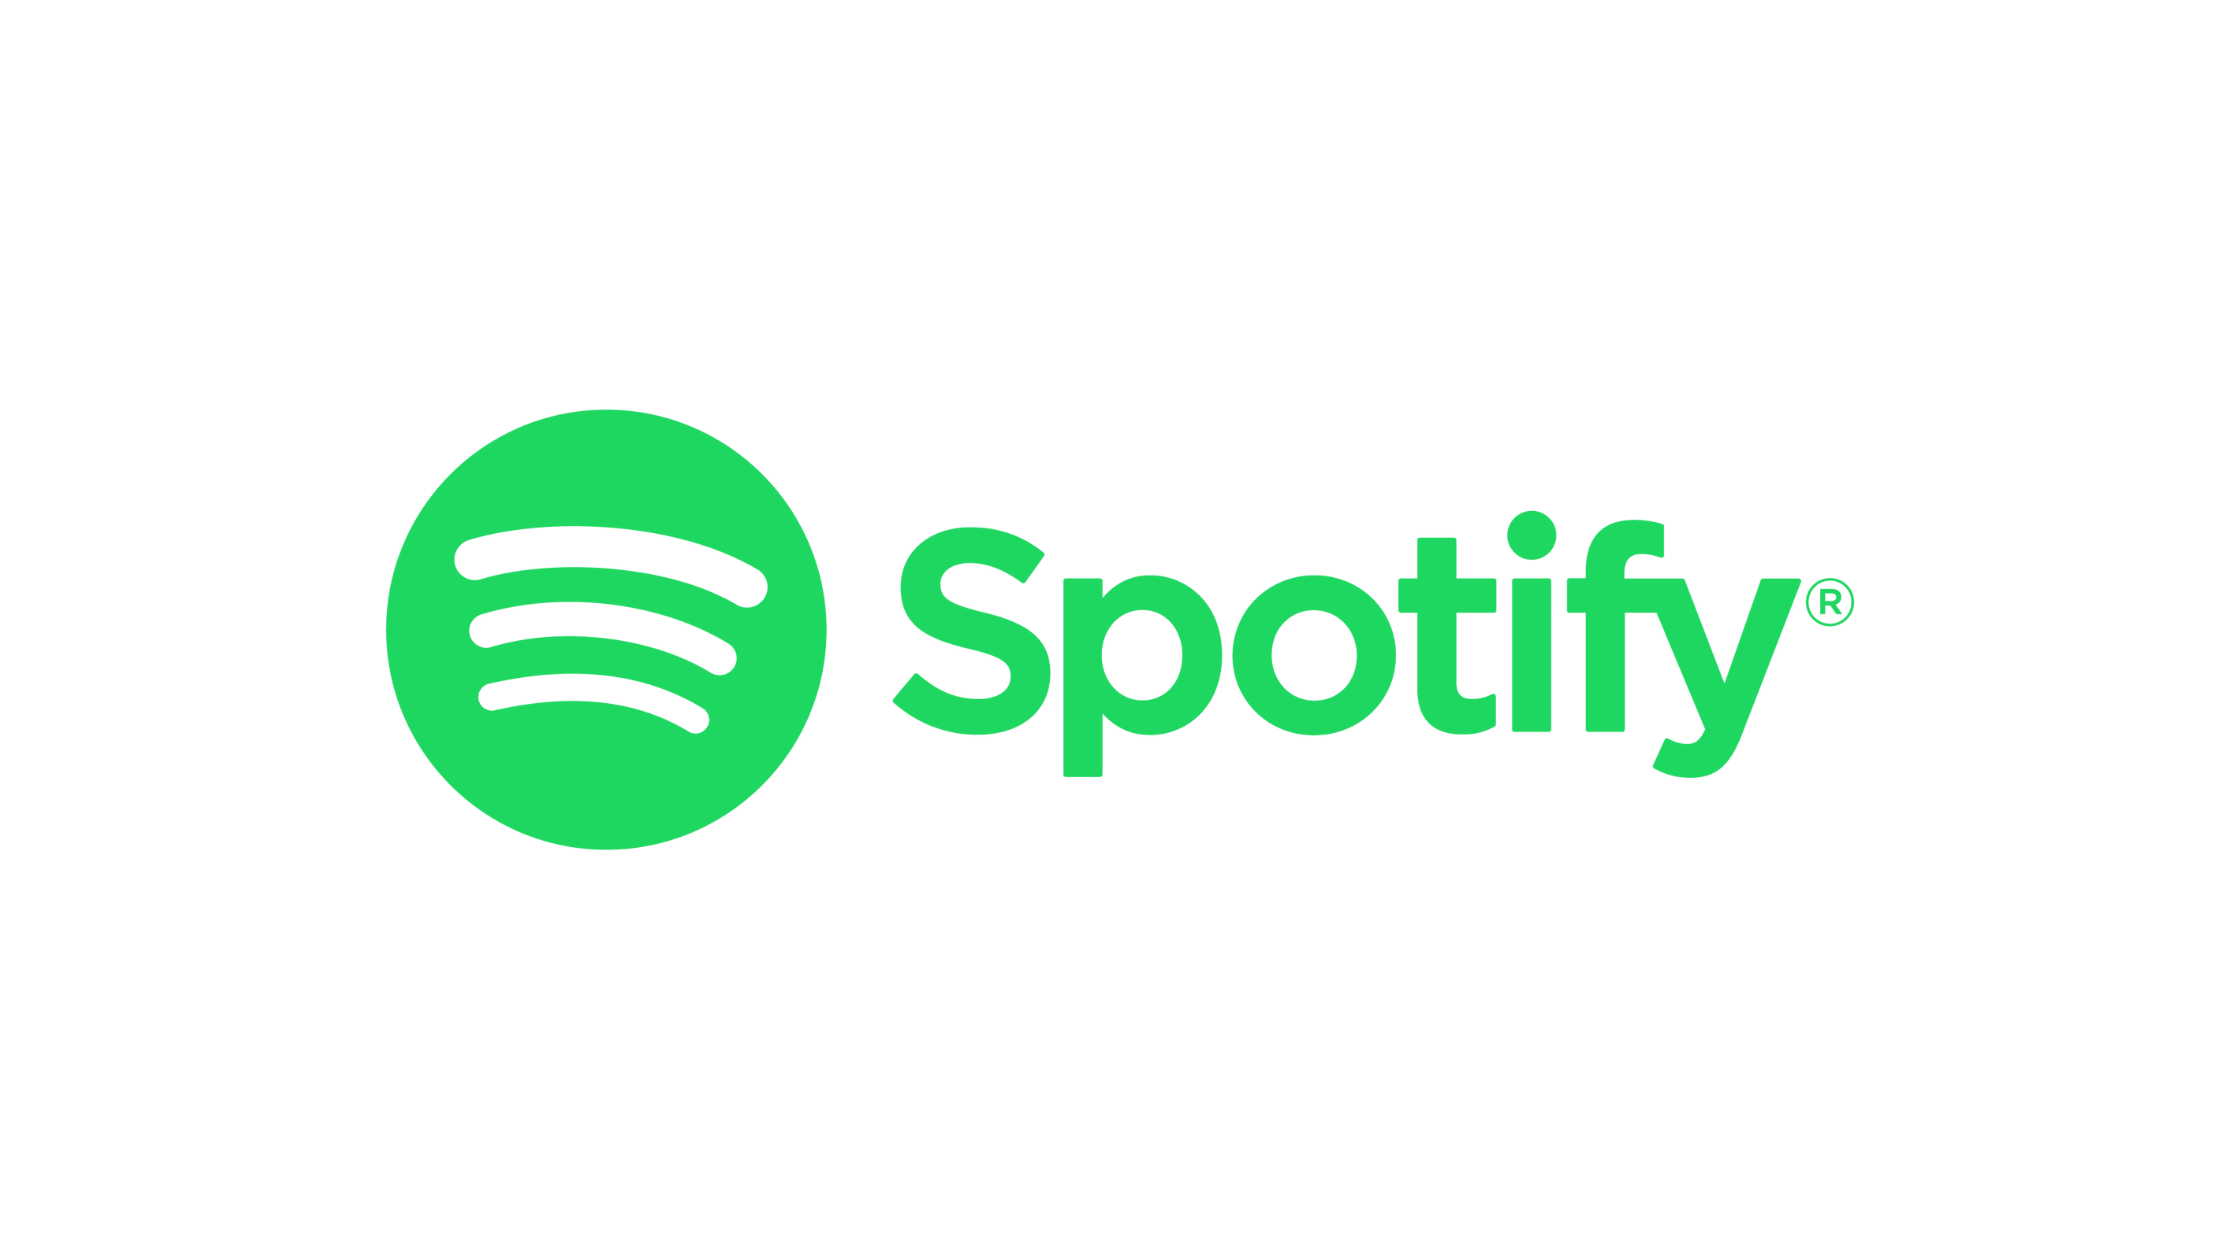 What Font Does Spotify Use?